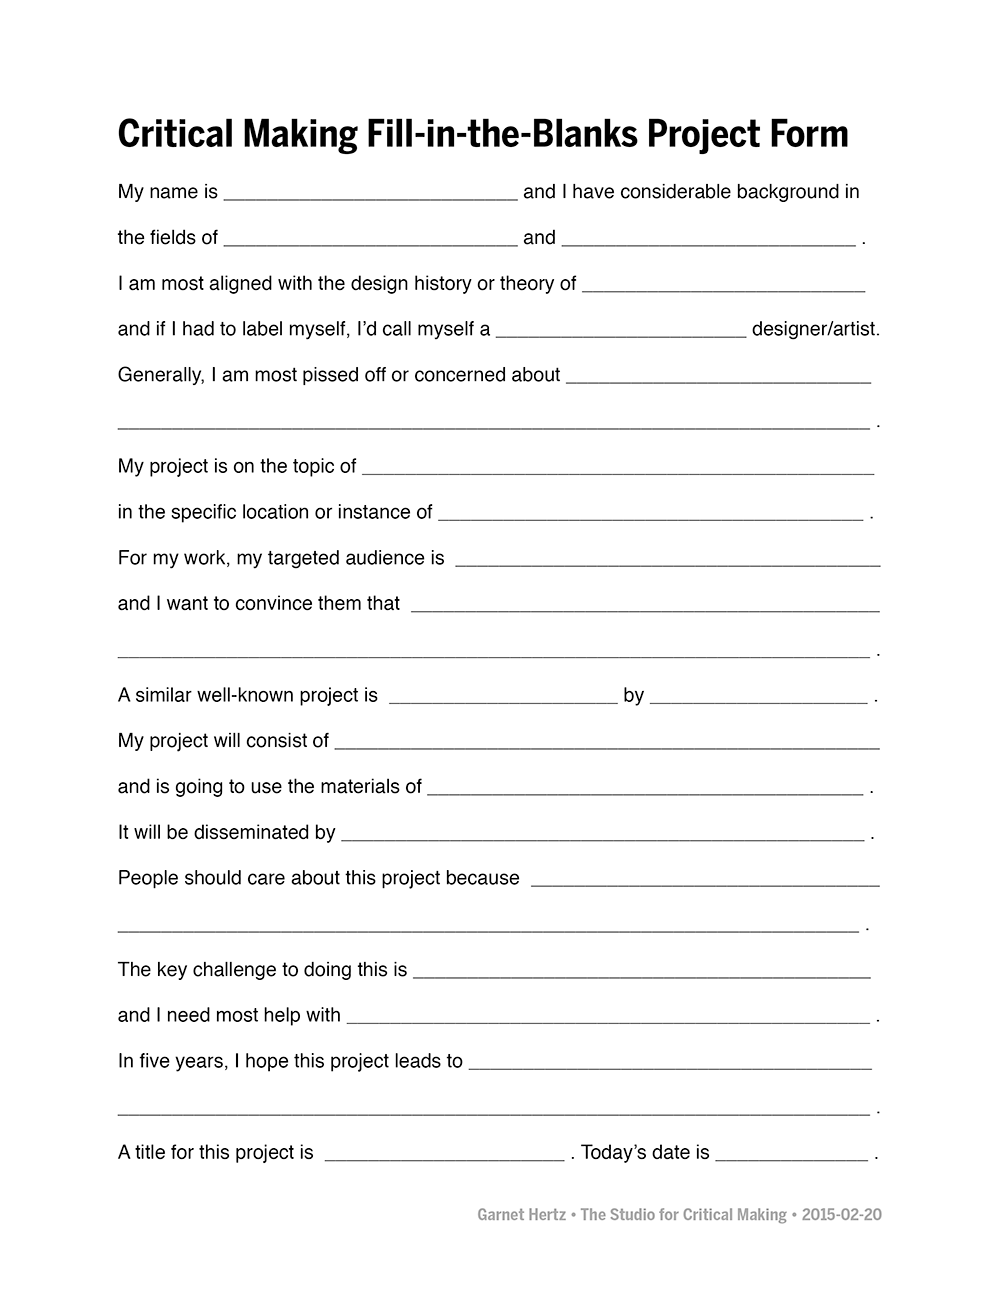 Fill-in-the-Blanks Project Form